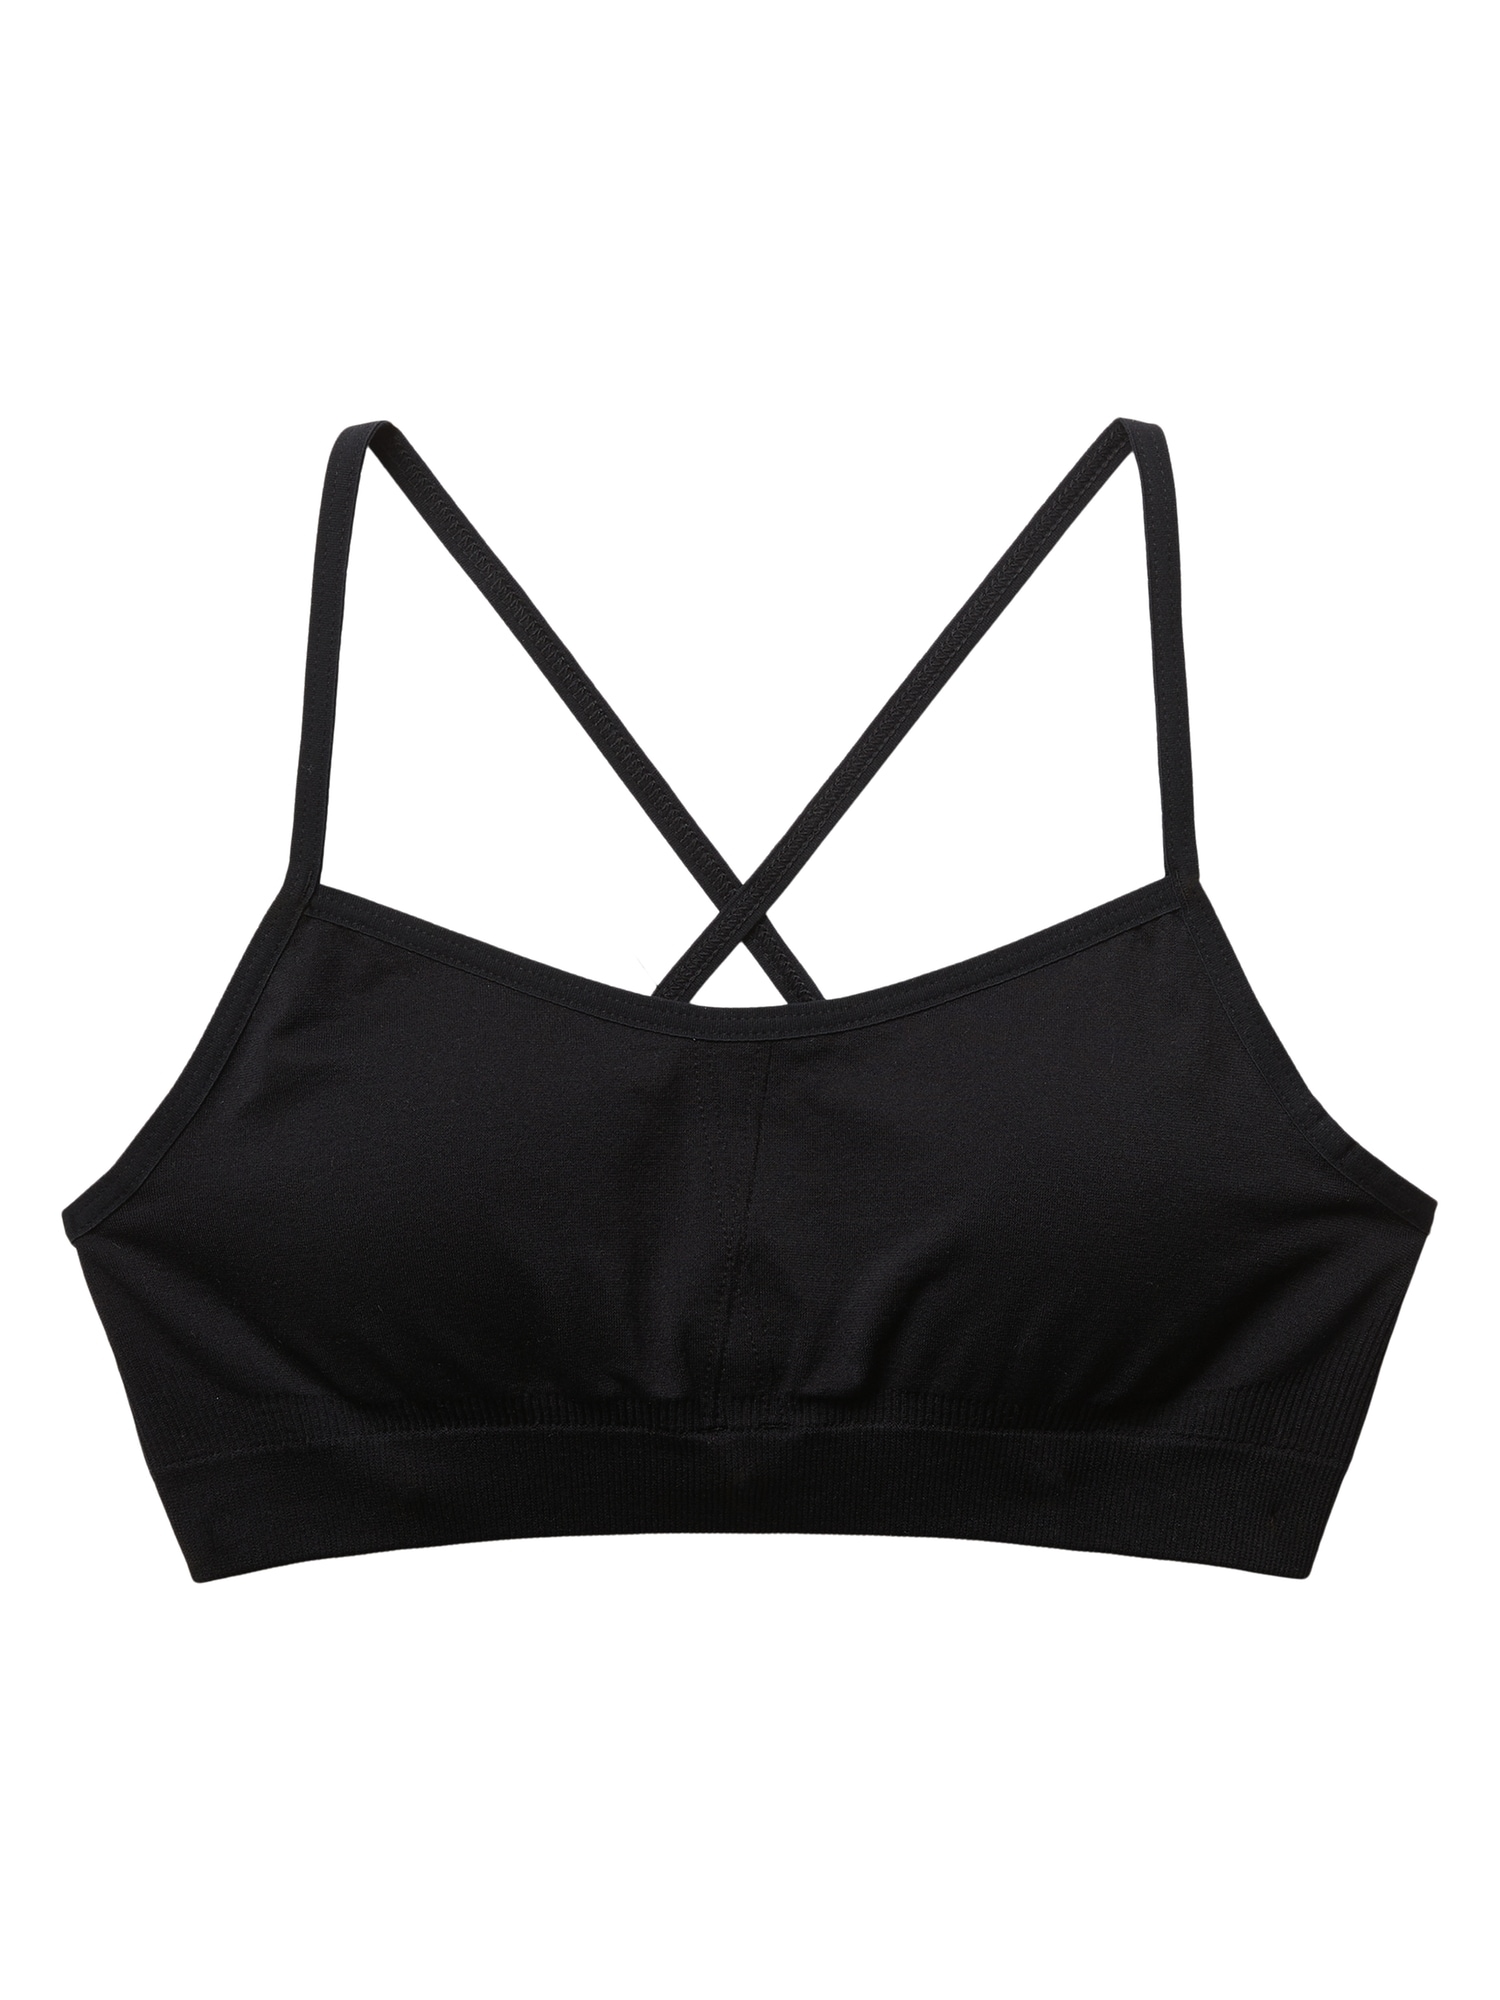 Girls Look of Play Seamless Sports Bras.